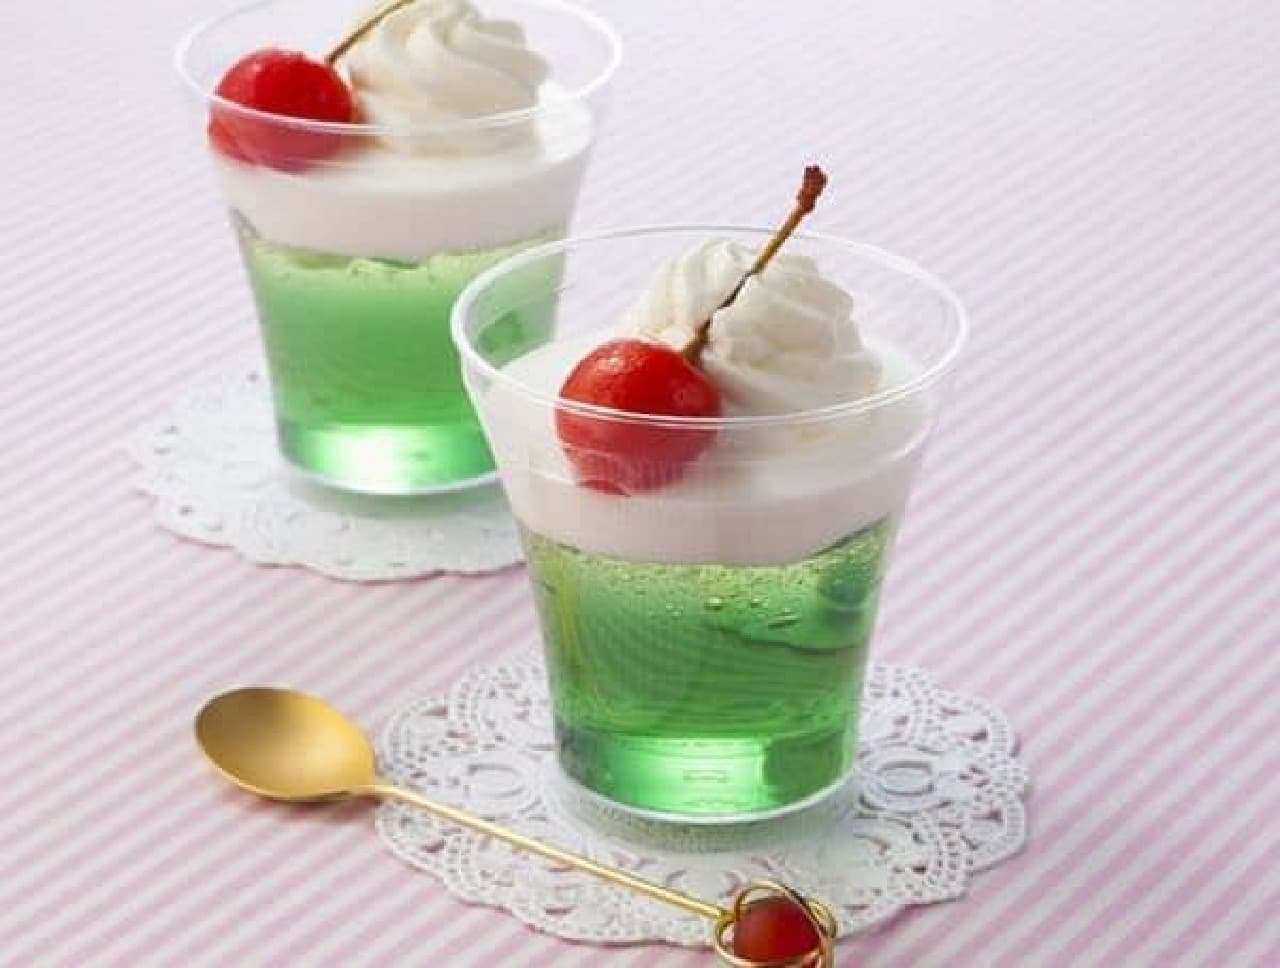 "It's like cream soda jelly" is a cream soda-style cup sweet topped with lemon mousse, whipped cream, and cherries.